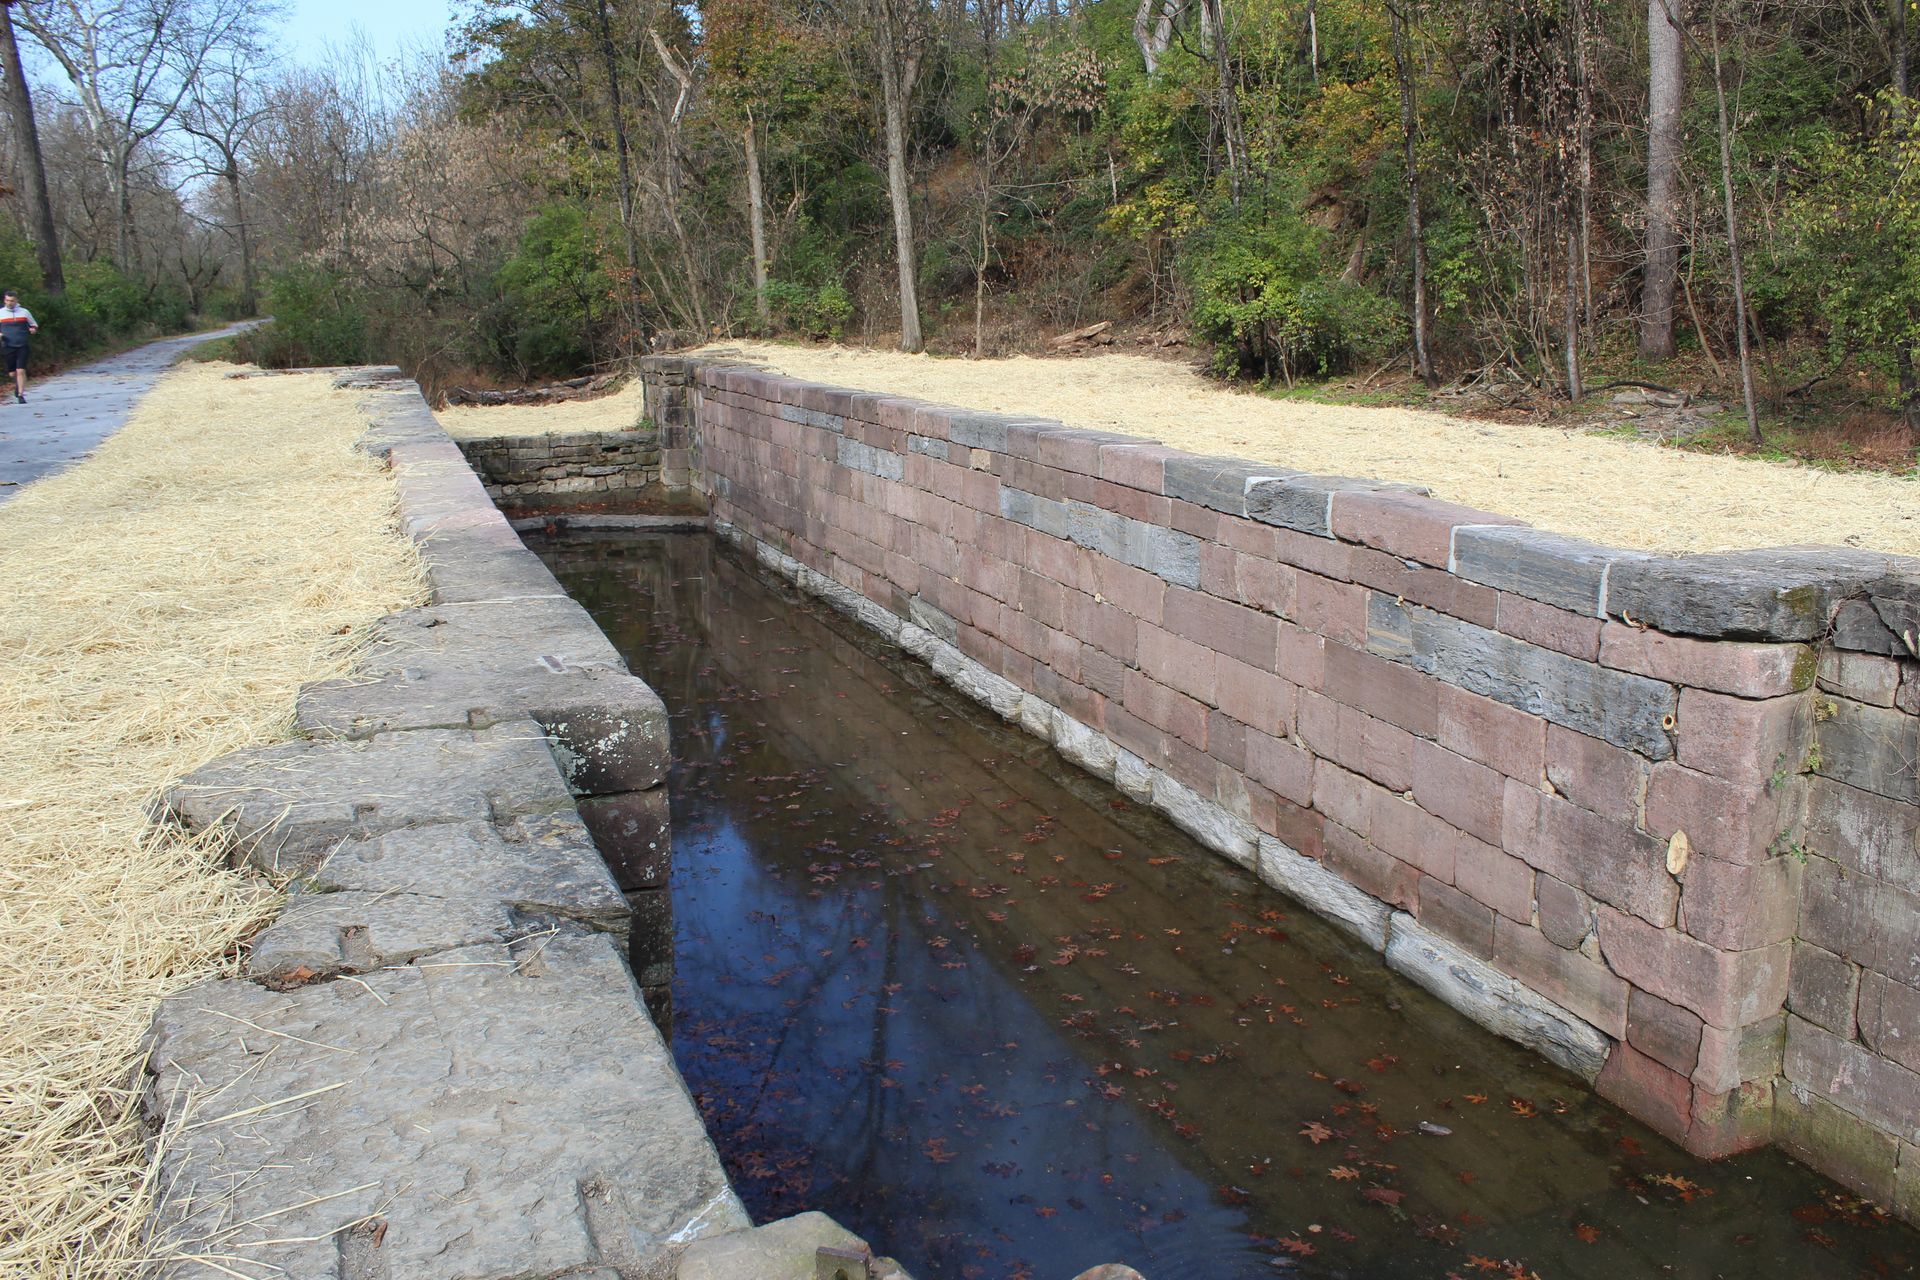 A brick wall surrounds a body of water in the middle of a forest.